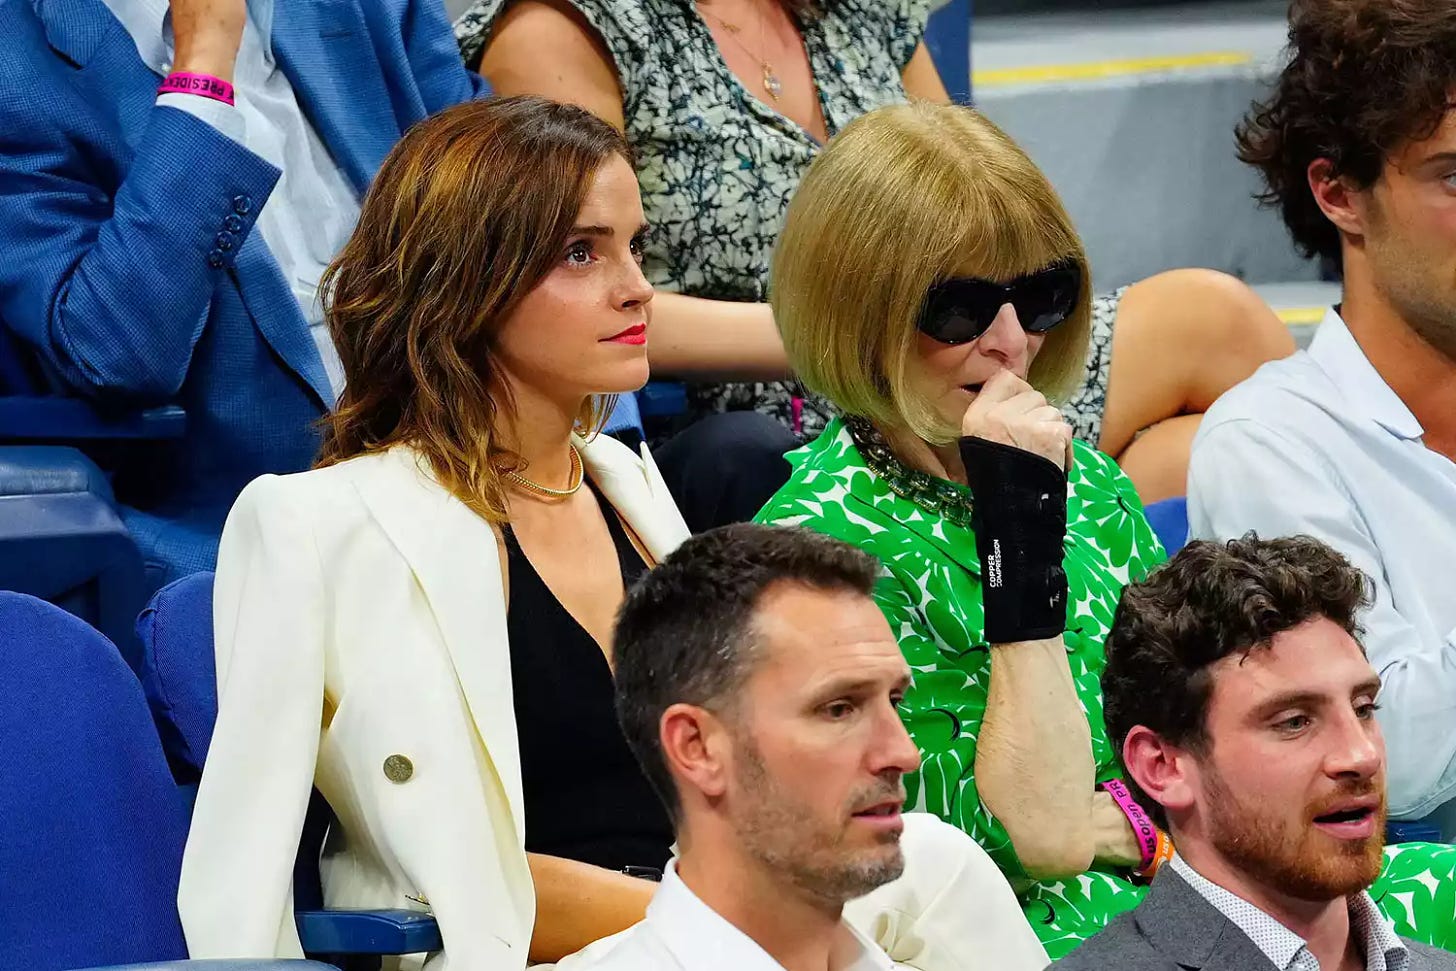 NEW YORK, NEW YORK - SEPTEMBER 05: Emma Watson (L) and Anna Wintour are seen at the 2023 US Open Tennis Championships on September 05, 2023 in New York City